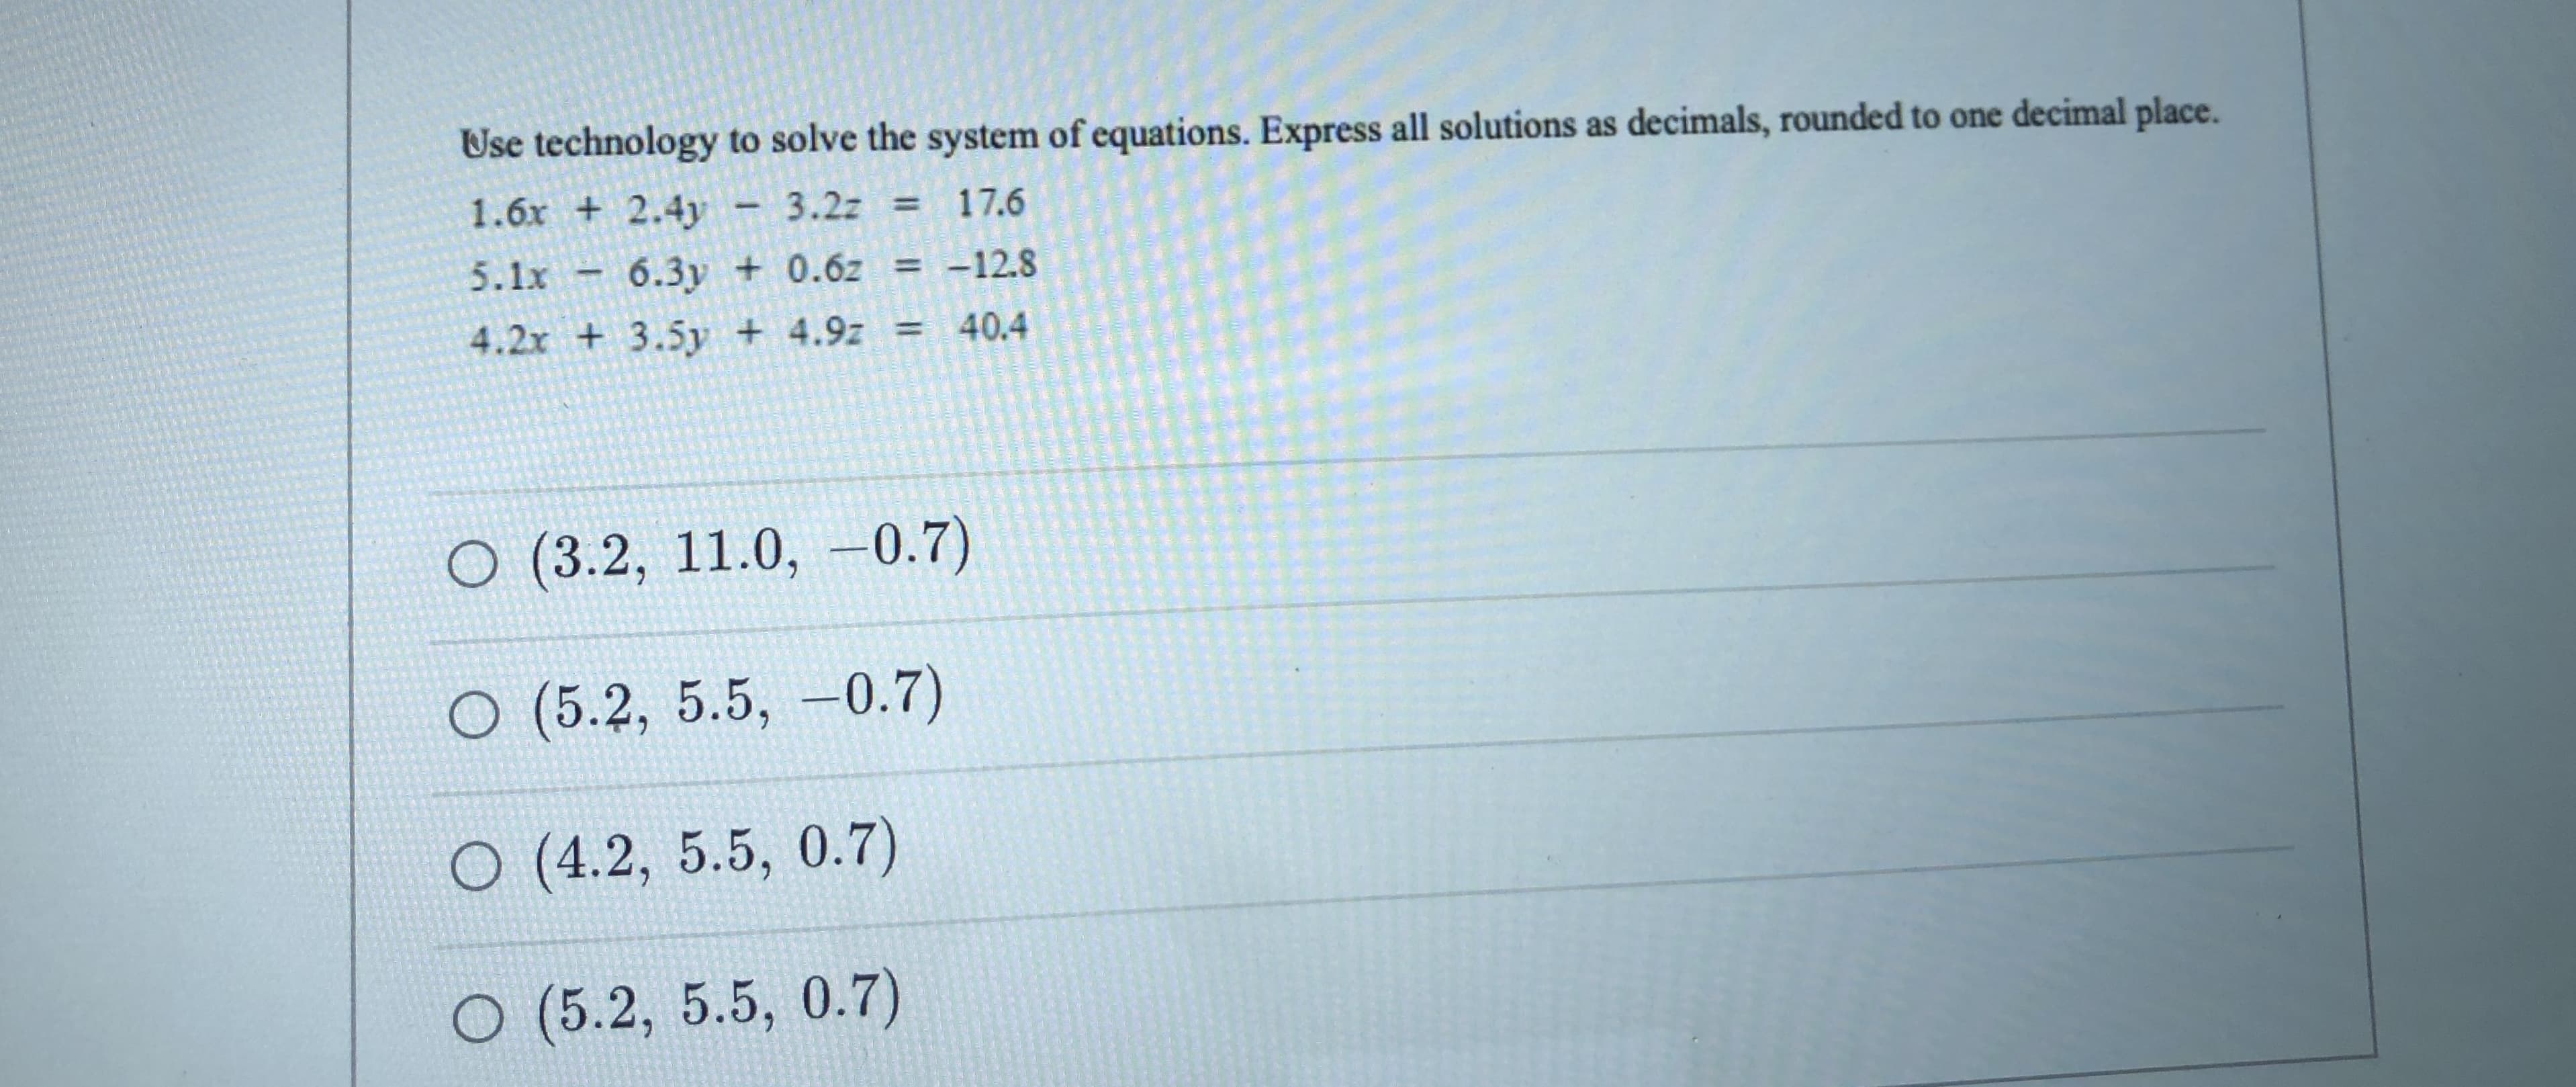 Use technology to solve the system of equations. Express all solutions as decimals, rounded to one decimal place.
1.6x + 2.4y
5.1x
3.2z = 17.6
6.3y + 0.6z = -128
4.2x + 3.5y + 4.9z =
40.4
